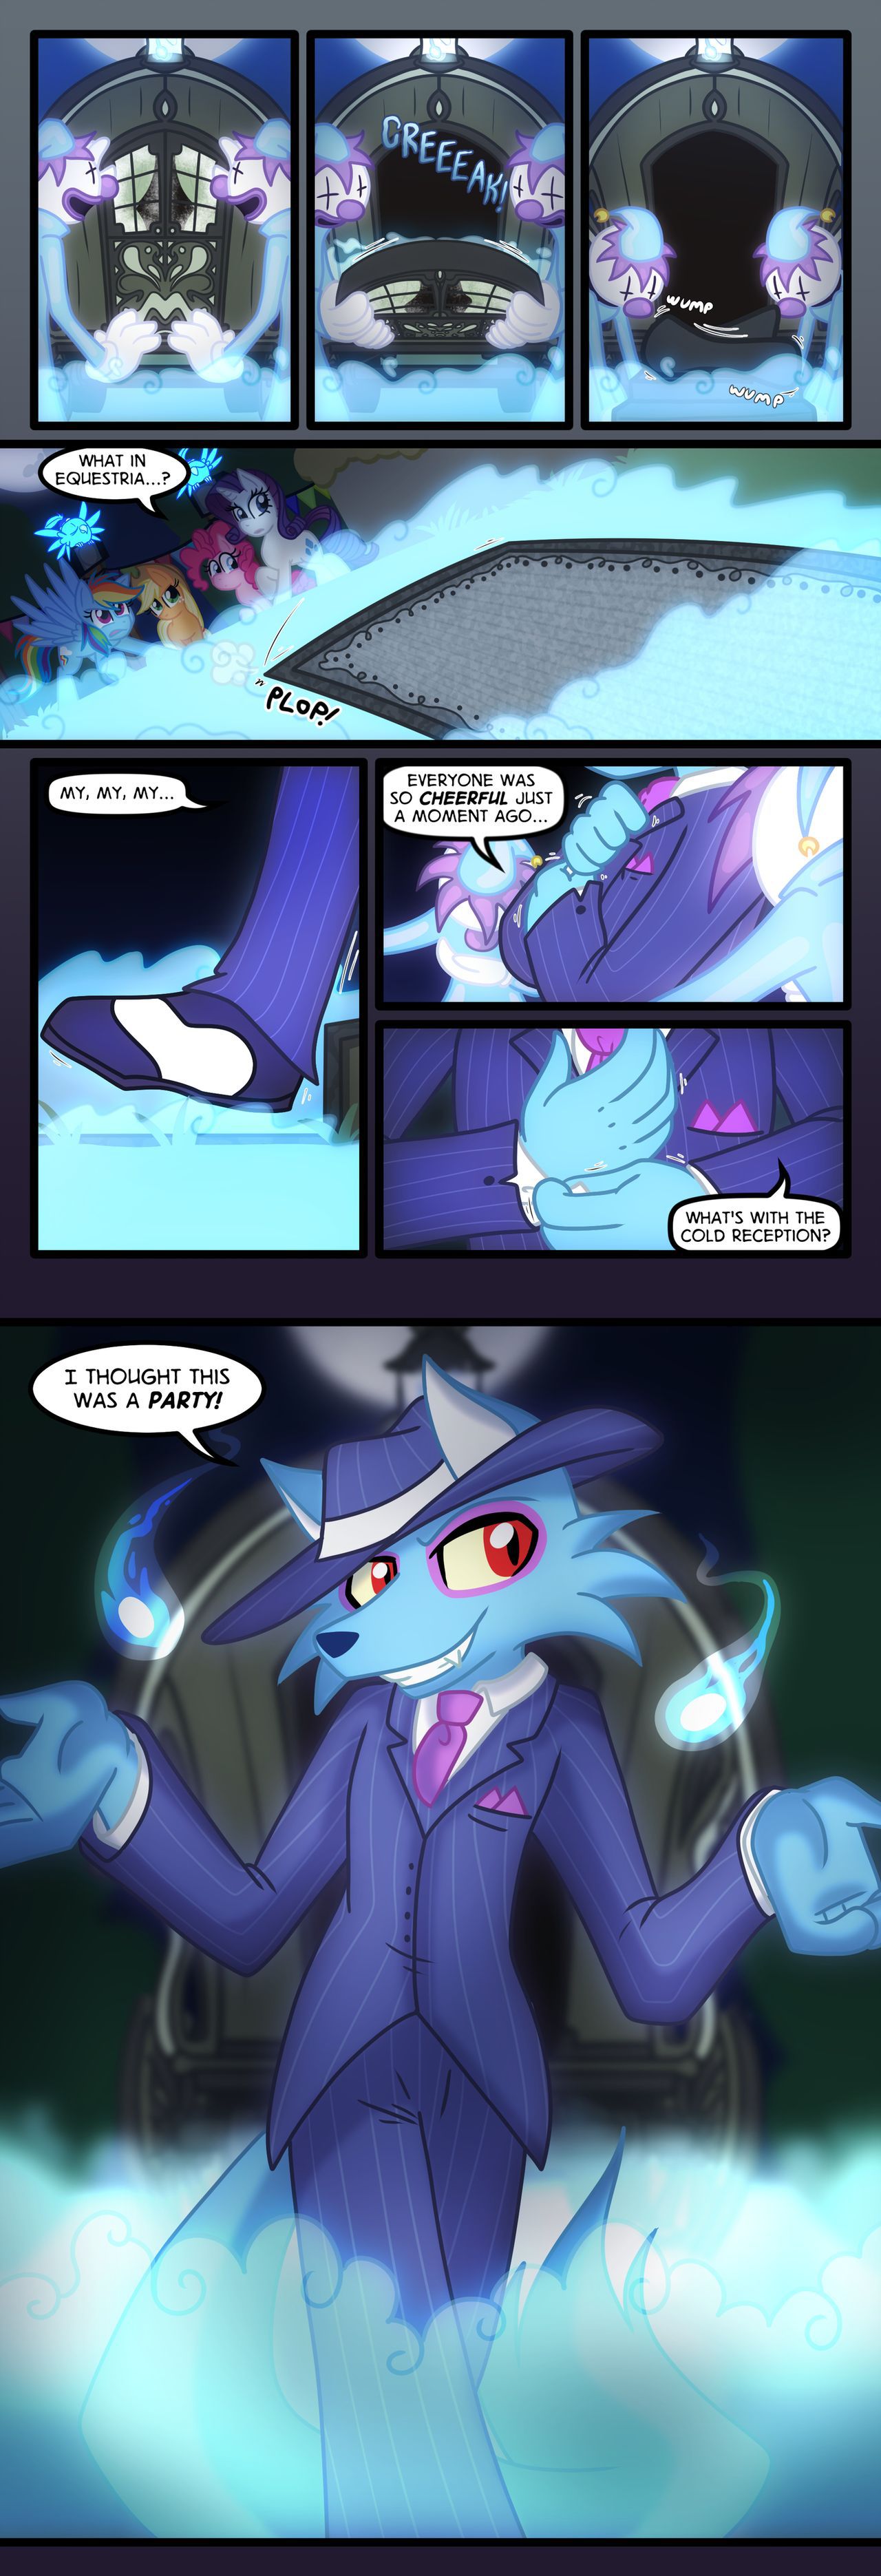 [Zaron] Lonely Hooves (My Little Pony Friendship Is Magic) [Ongoing] 115